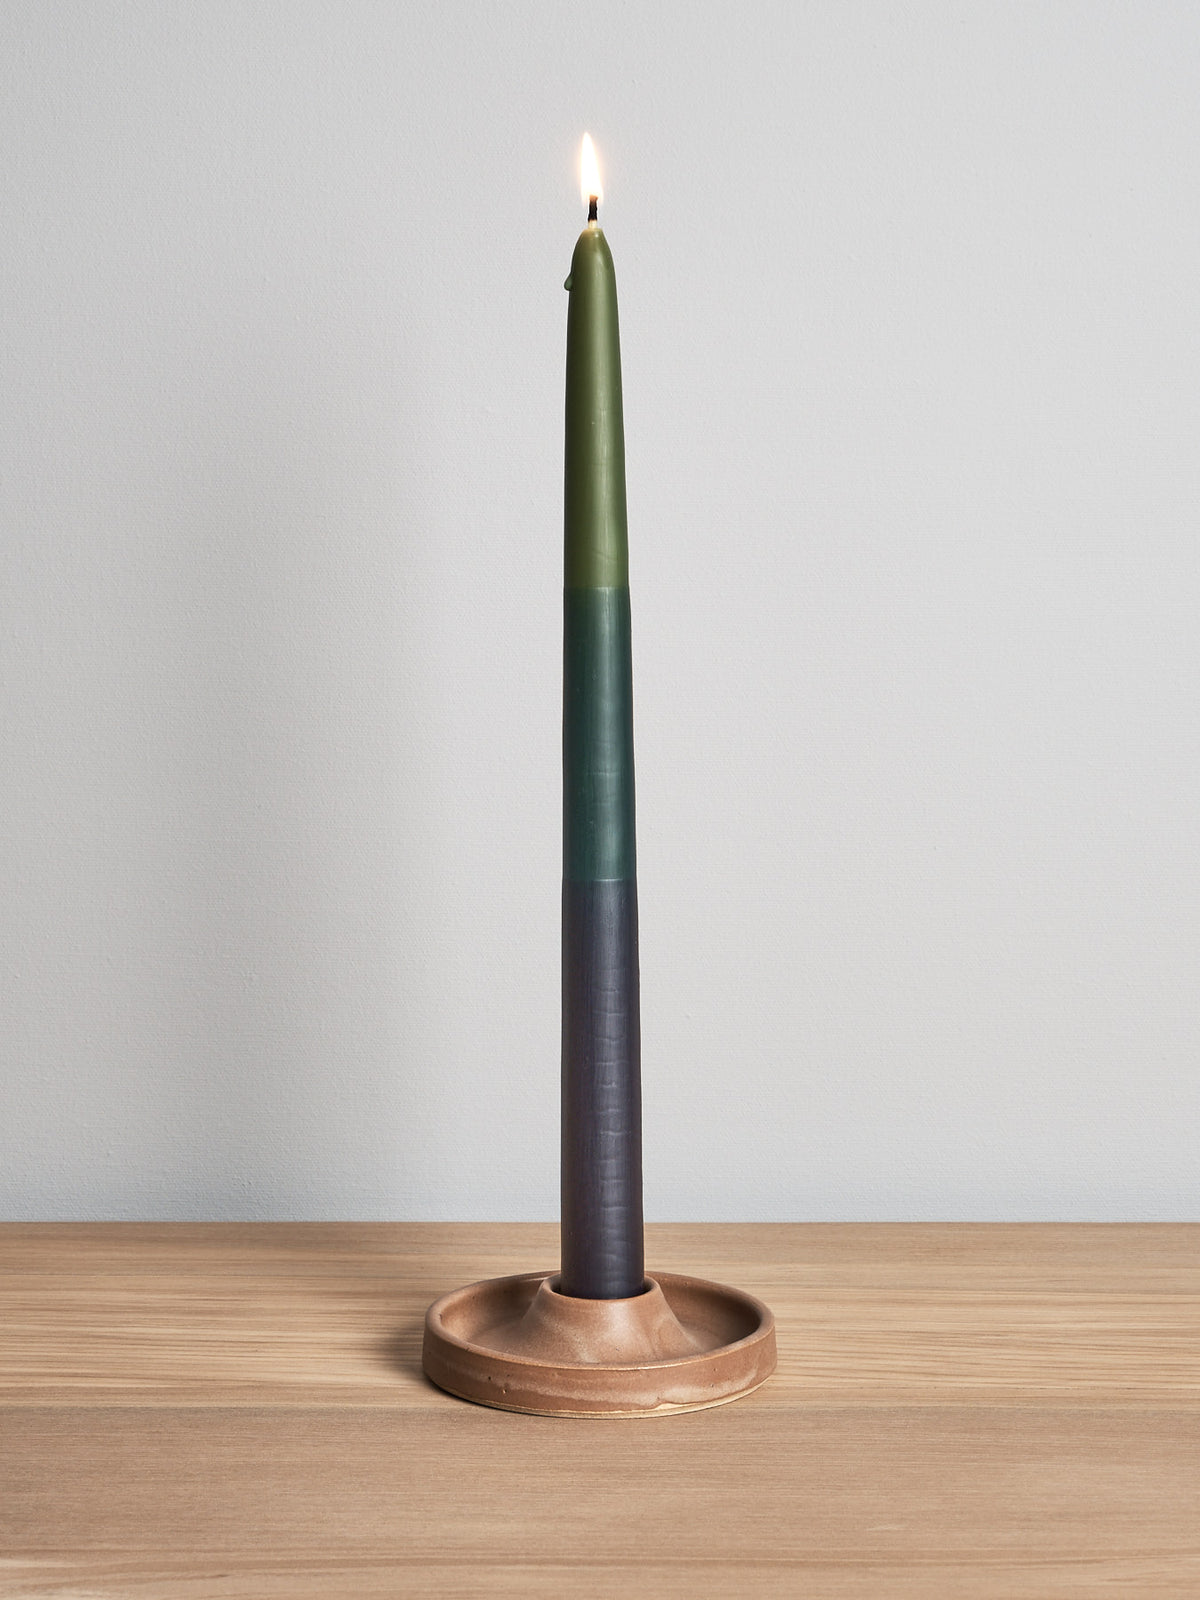 A Candle Holder – Ochre by deborah sweeney sitting on top of a wooden table.